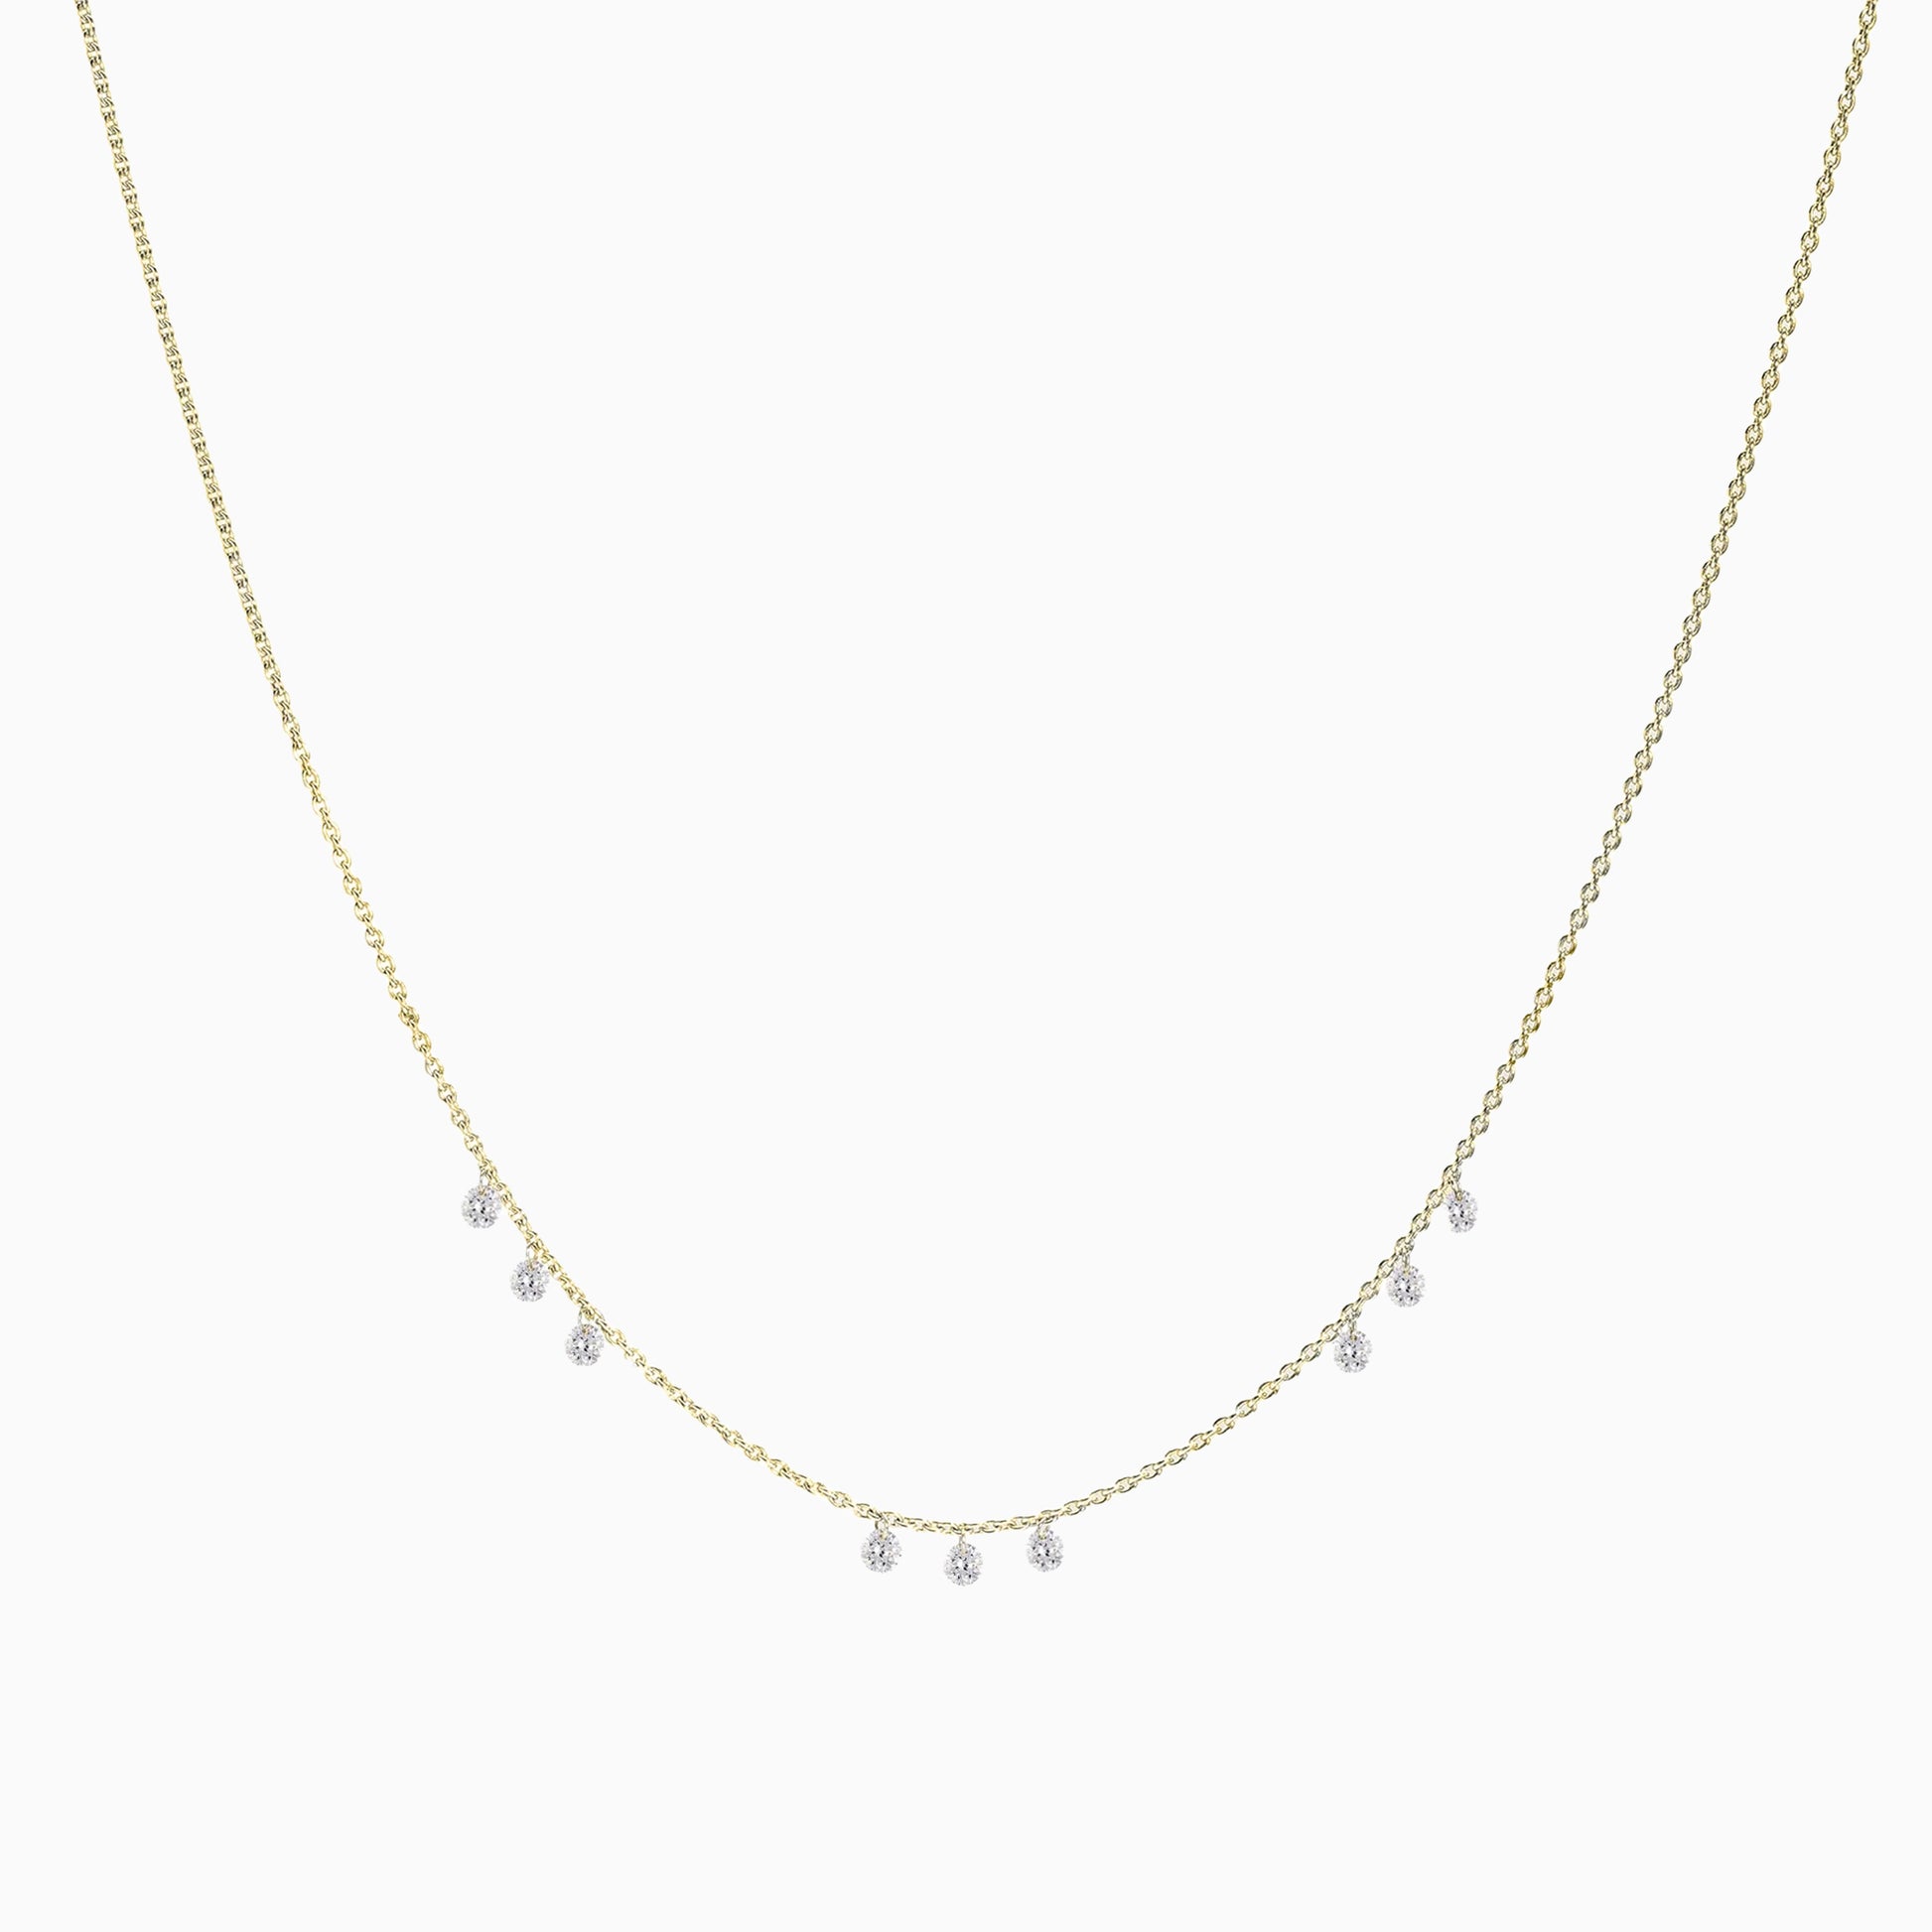 Floating Nine Diamonds Necklace in Yellow Gold on a white background